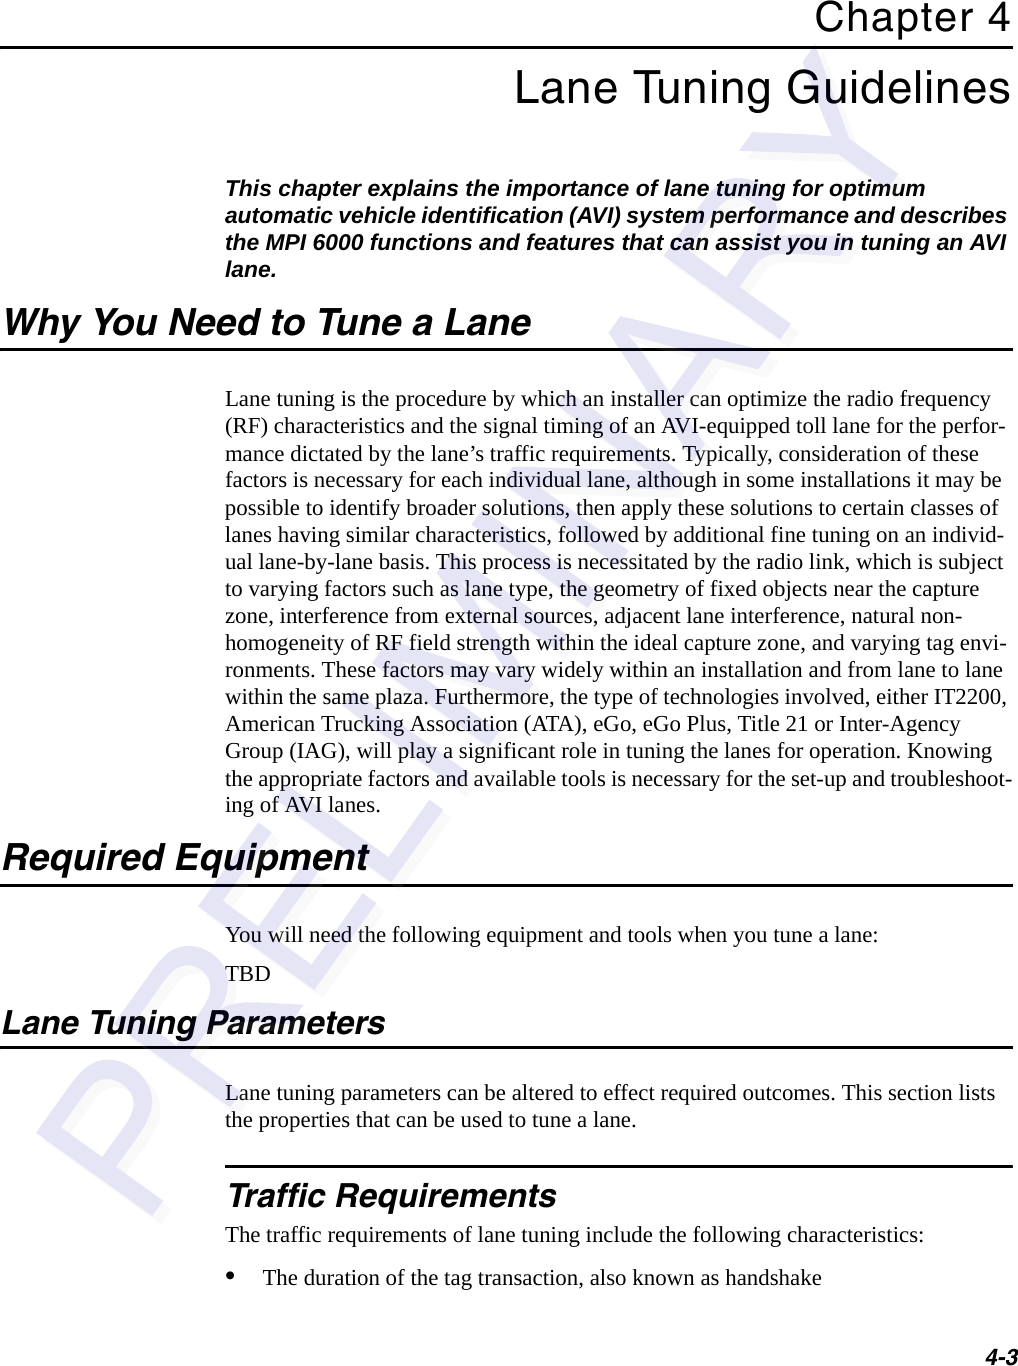 4-3Chapter 4Lane Tuning Guidelines This chapter explains the importance of lane tuning for optimum automatic vehicle identification (AVI) system performance and describes the MPI 6000 functions and features that can assist you in tuning an AVI lane.Why You Need to Tune a LaneLane tuning is the procedure by which an installer can optimize the radio frequency (RF) characteristics and the signal timing of an AVI-equipped toll lane for the perfor-mance dictated by the lane’s traffic requirements. Typically, consideration of these factors is necessary for each individual lane, although in some installations it may be possible to identify broader solutions, then apply these solutions to certain classes of lanes having similar characteristics, followed by additional fine tuning on an individ-ual lane-by-lane basis. This process is necessitated by the radio link, which is subject to varying factors such as lane type, the geometry of fixed objects near the capture zone, interference from external sources, adjacent lane interference, natural non-homogeneity of RF field strength within the ideal capture zone, and varying tag envi-ronments. These factors may vary widely within an installation and from lane to lane within the same plaza. Furthermore, the type of technologies involved, either IT2200, American Trucking Association (ATA), eGo, eGo Plus, Title 21 or Inter-Agency Group (IAG), will play a significant role in tuning the lanes for operation. Knowing the appropriate factors and available tools is necessary for the set-up and troubleshoot-ing of AVI lanes.Required EquipmentYou will need the following equipment and tools when you tune a lane:TBDLane Tuning ParametersLane tuning parameters can be altered to effect required outcomes. This section lists the properties that can be used to tune a lane.Traffic RequirementsThe traffic requirements of lane tuning include the following characteristics:•The duration of the tag transaction, also known as handshake